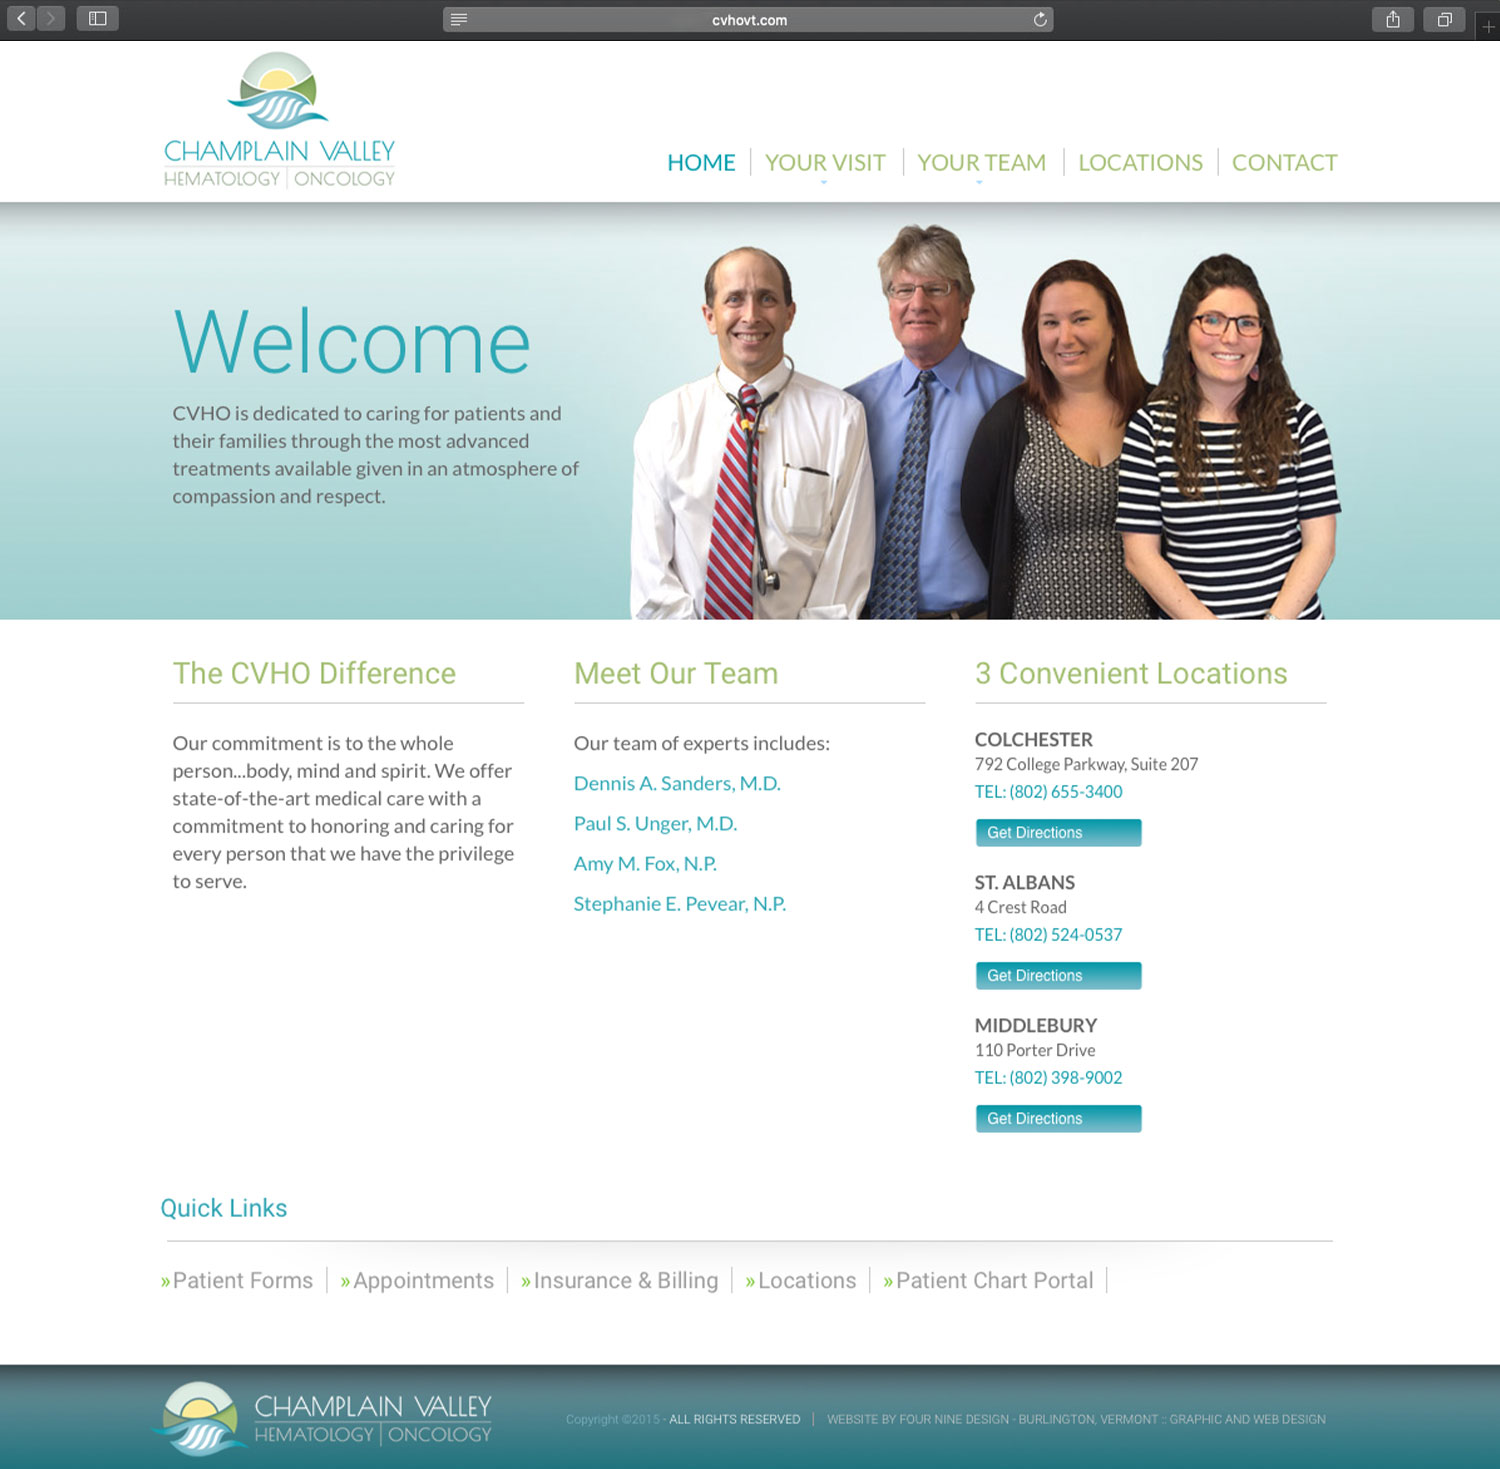 Website design and website development for Champlain Valley Hematology and Oncology - homepage view.